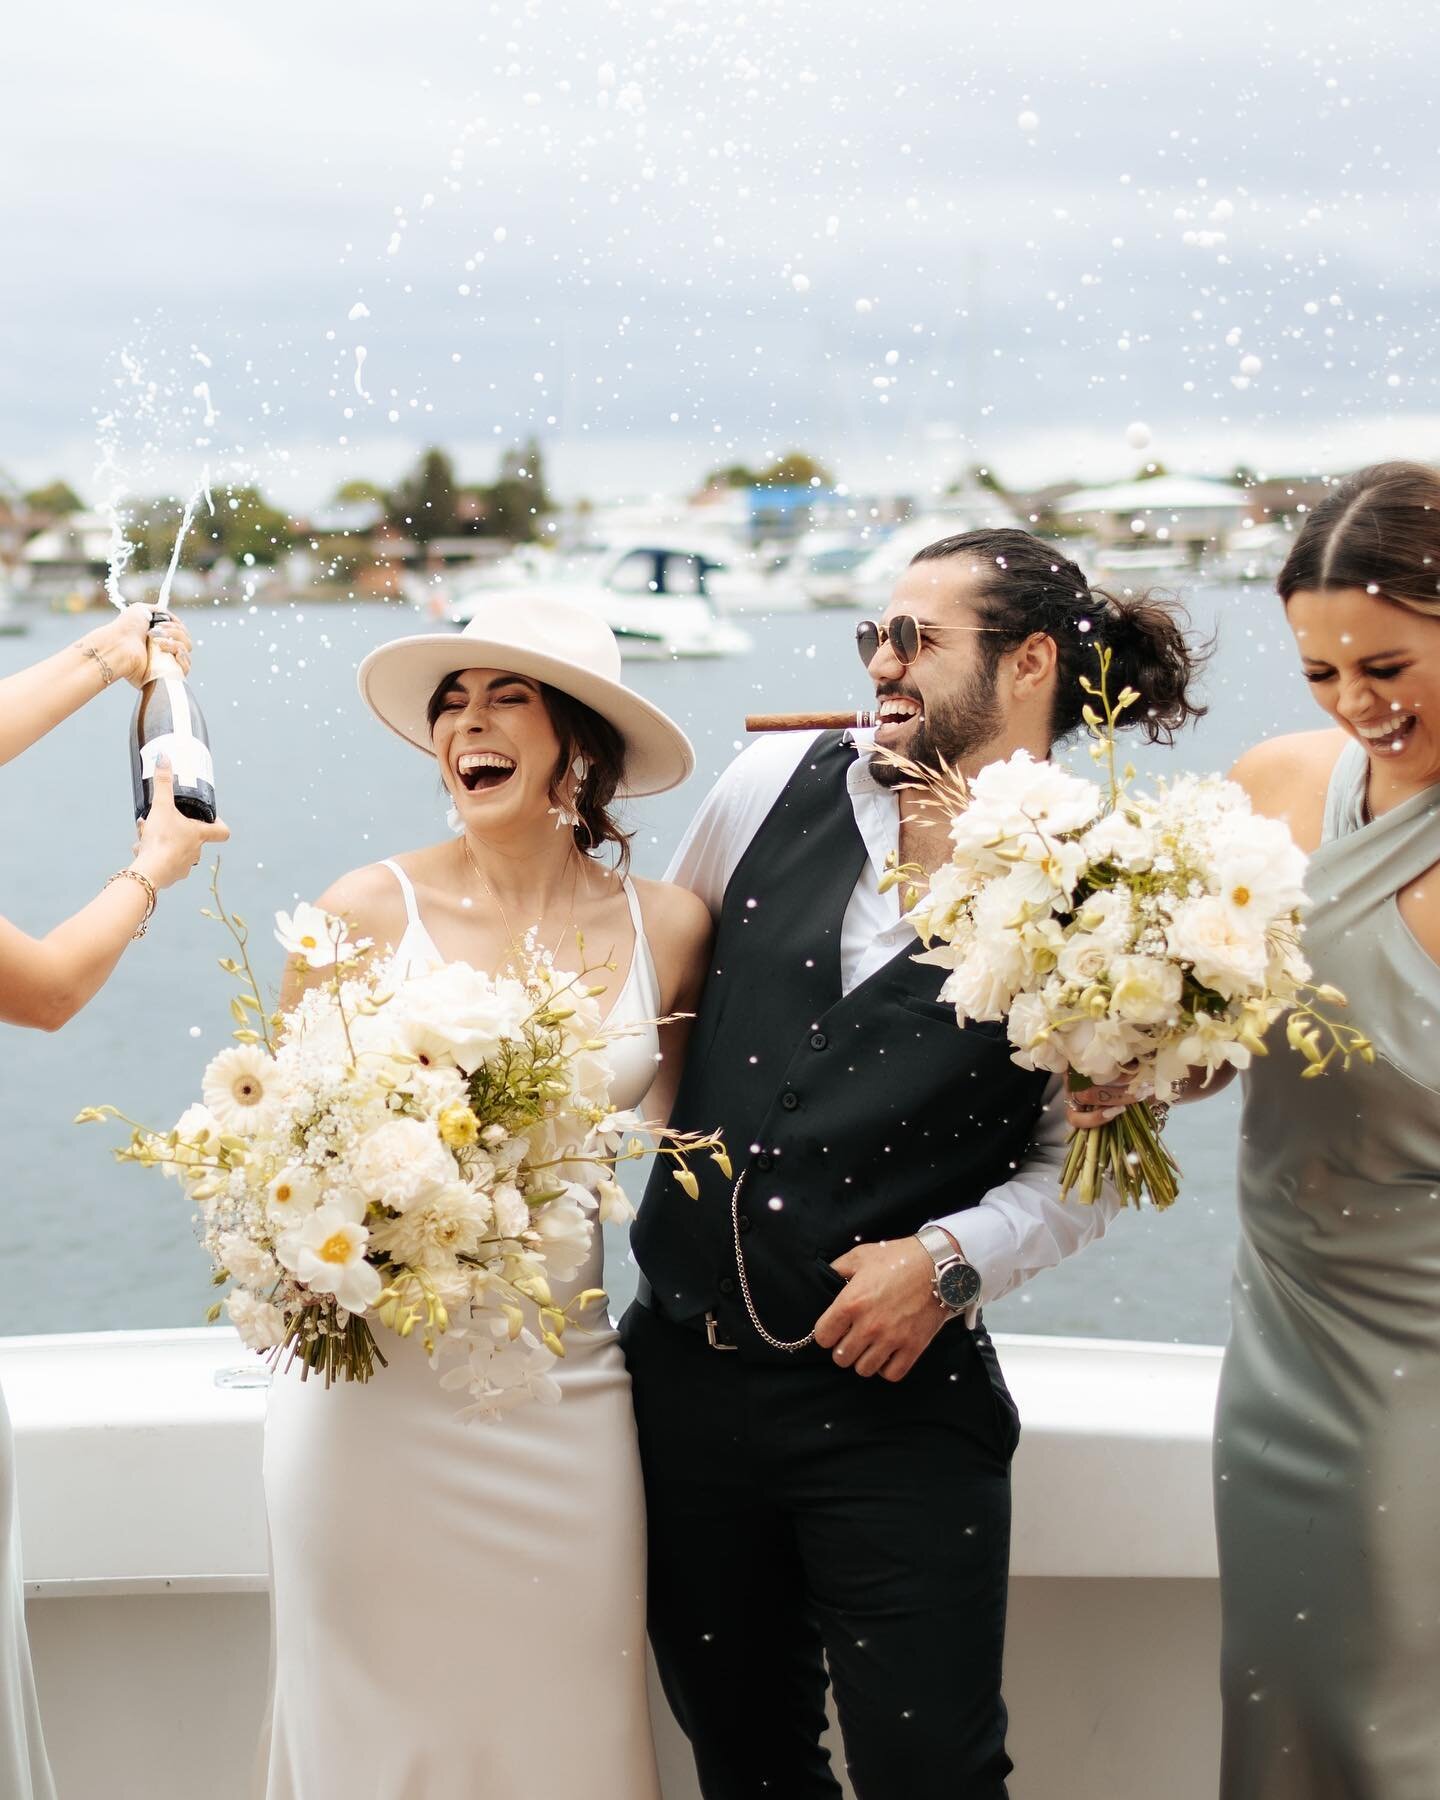 This lot brought nothing but the very best of vibes! 

Huge shoutout to @finaltouchbridal for organising the magic ⚓️❤️

Bride &amp; Bridesmaid Dresses: @finaltouchbridal 
Hair: @aliciaspersonalhairdesign 
Photography: @bonnywythesphotography 
Models